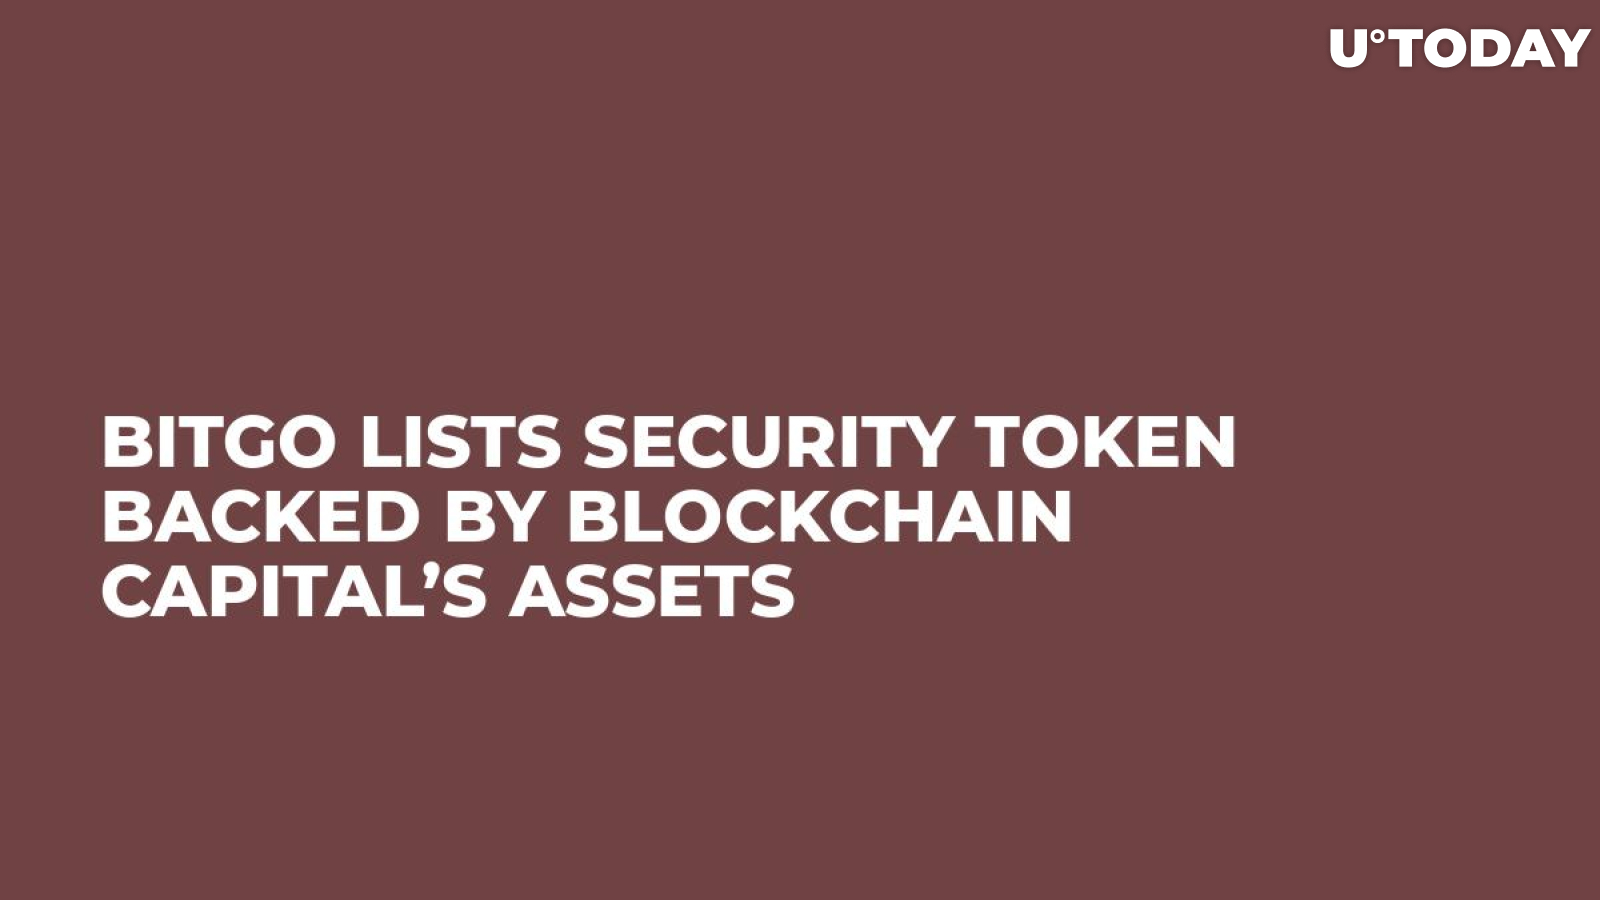 BitGo Lists Security Token Backed by Blockchain Capital’s Assets